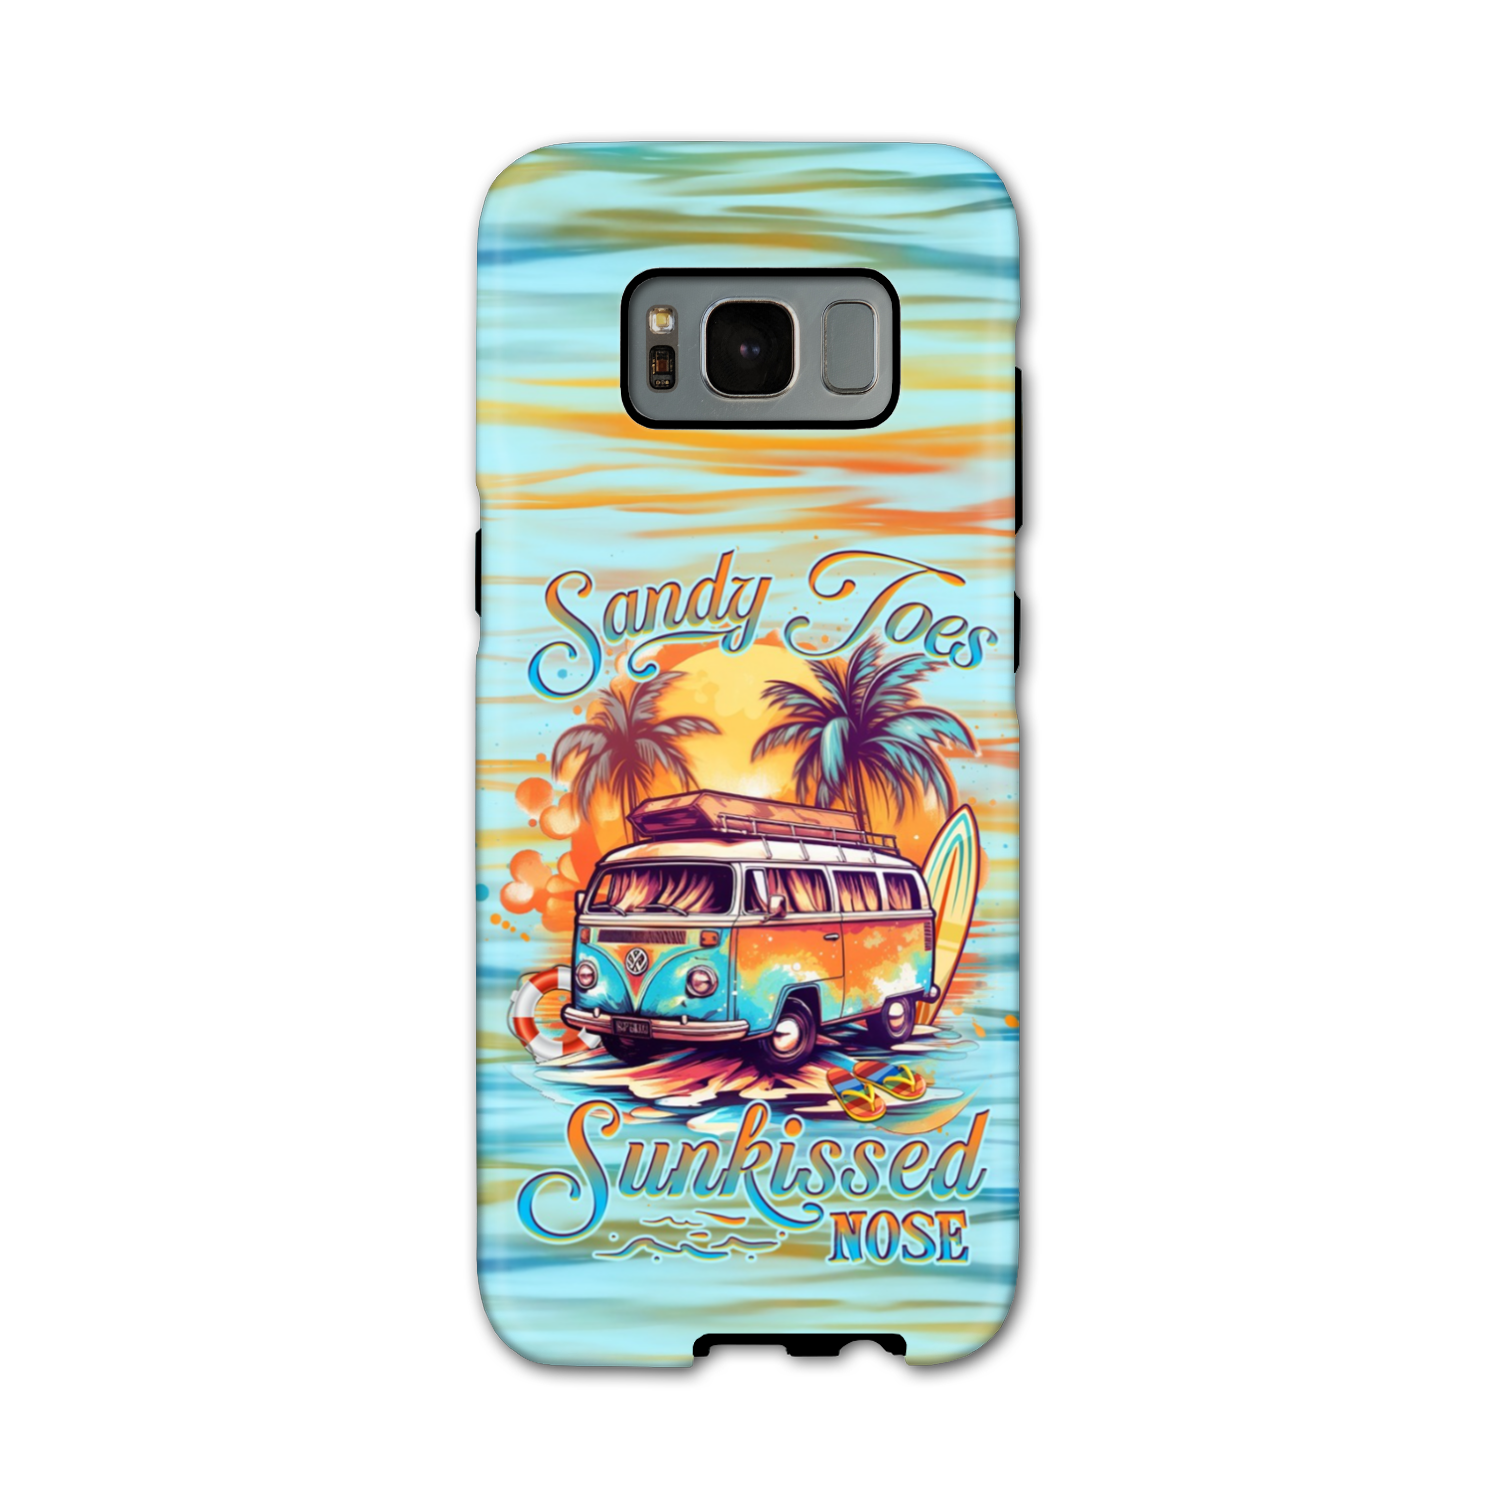 SANDY TOES SUNKISSED NOSE PHONE CASE - YHHG2405234